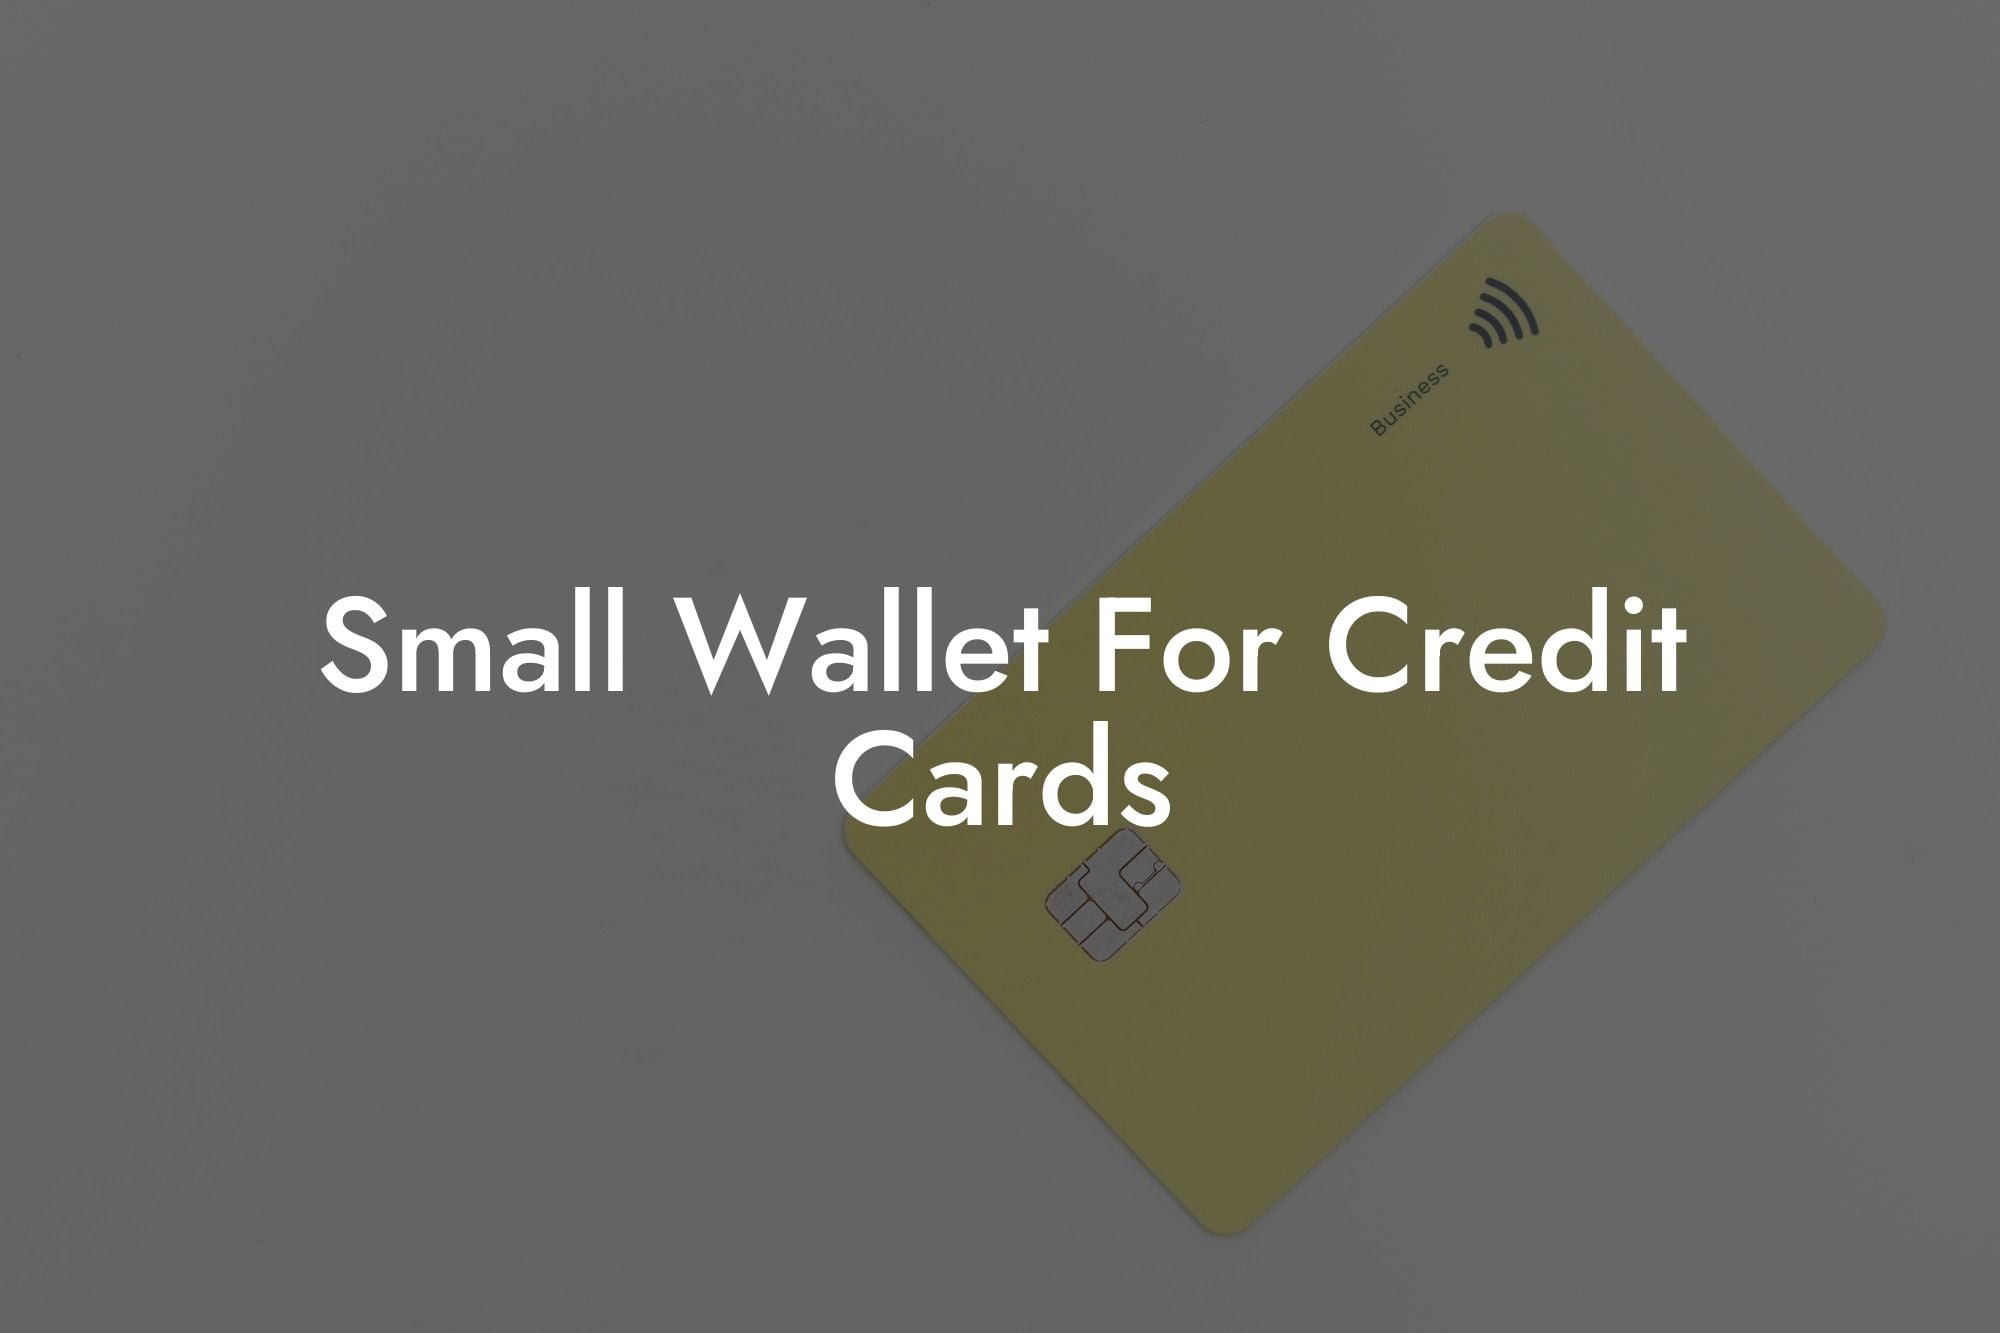 Small Wallet For Credit Cards